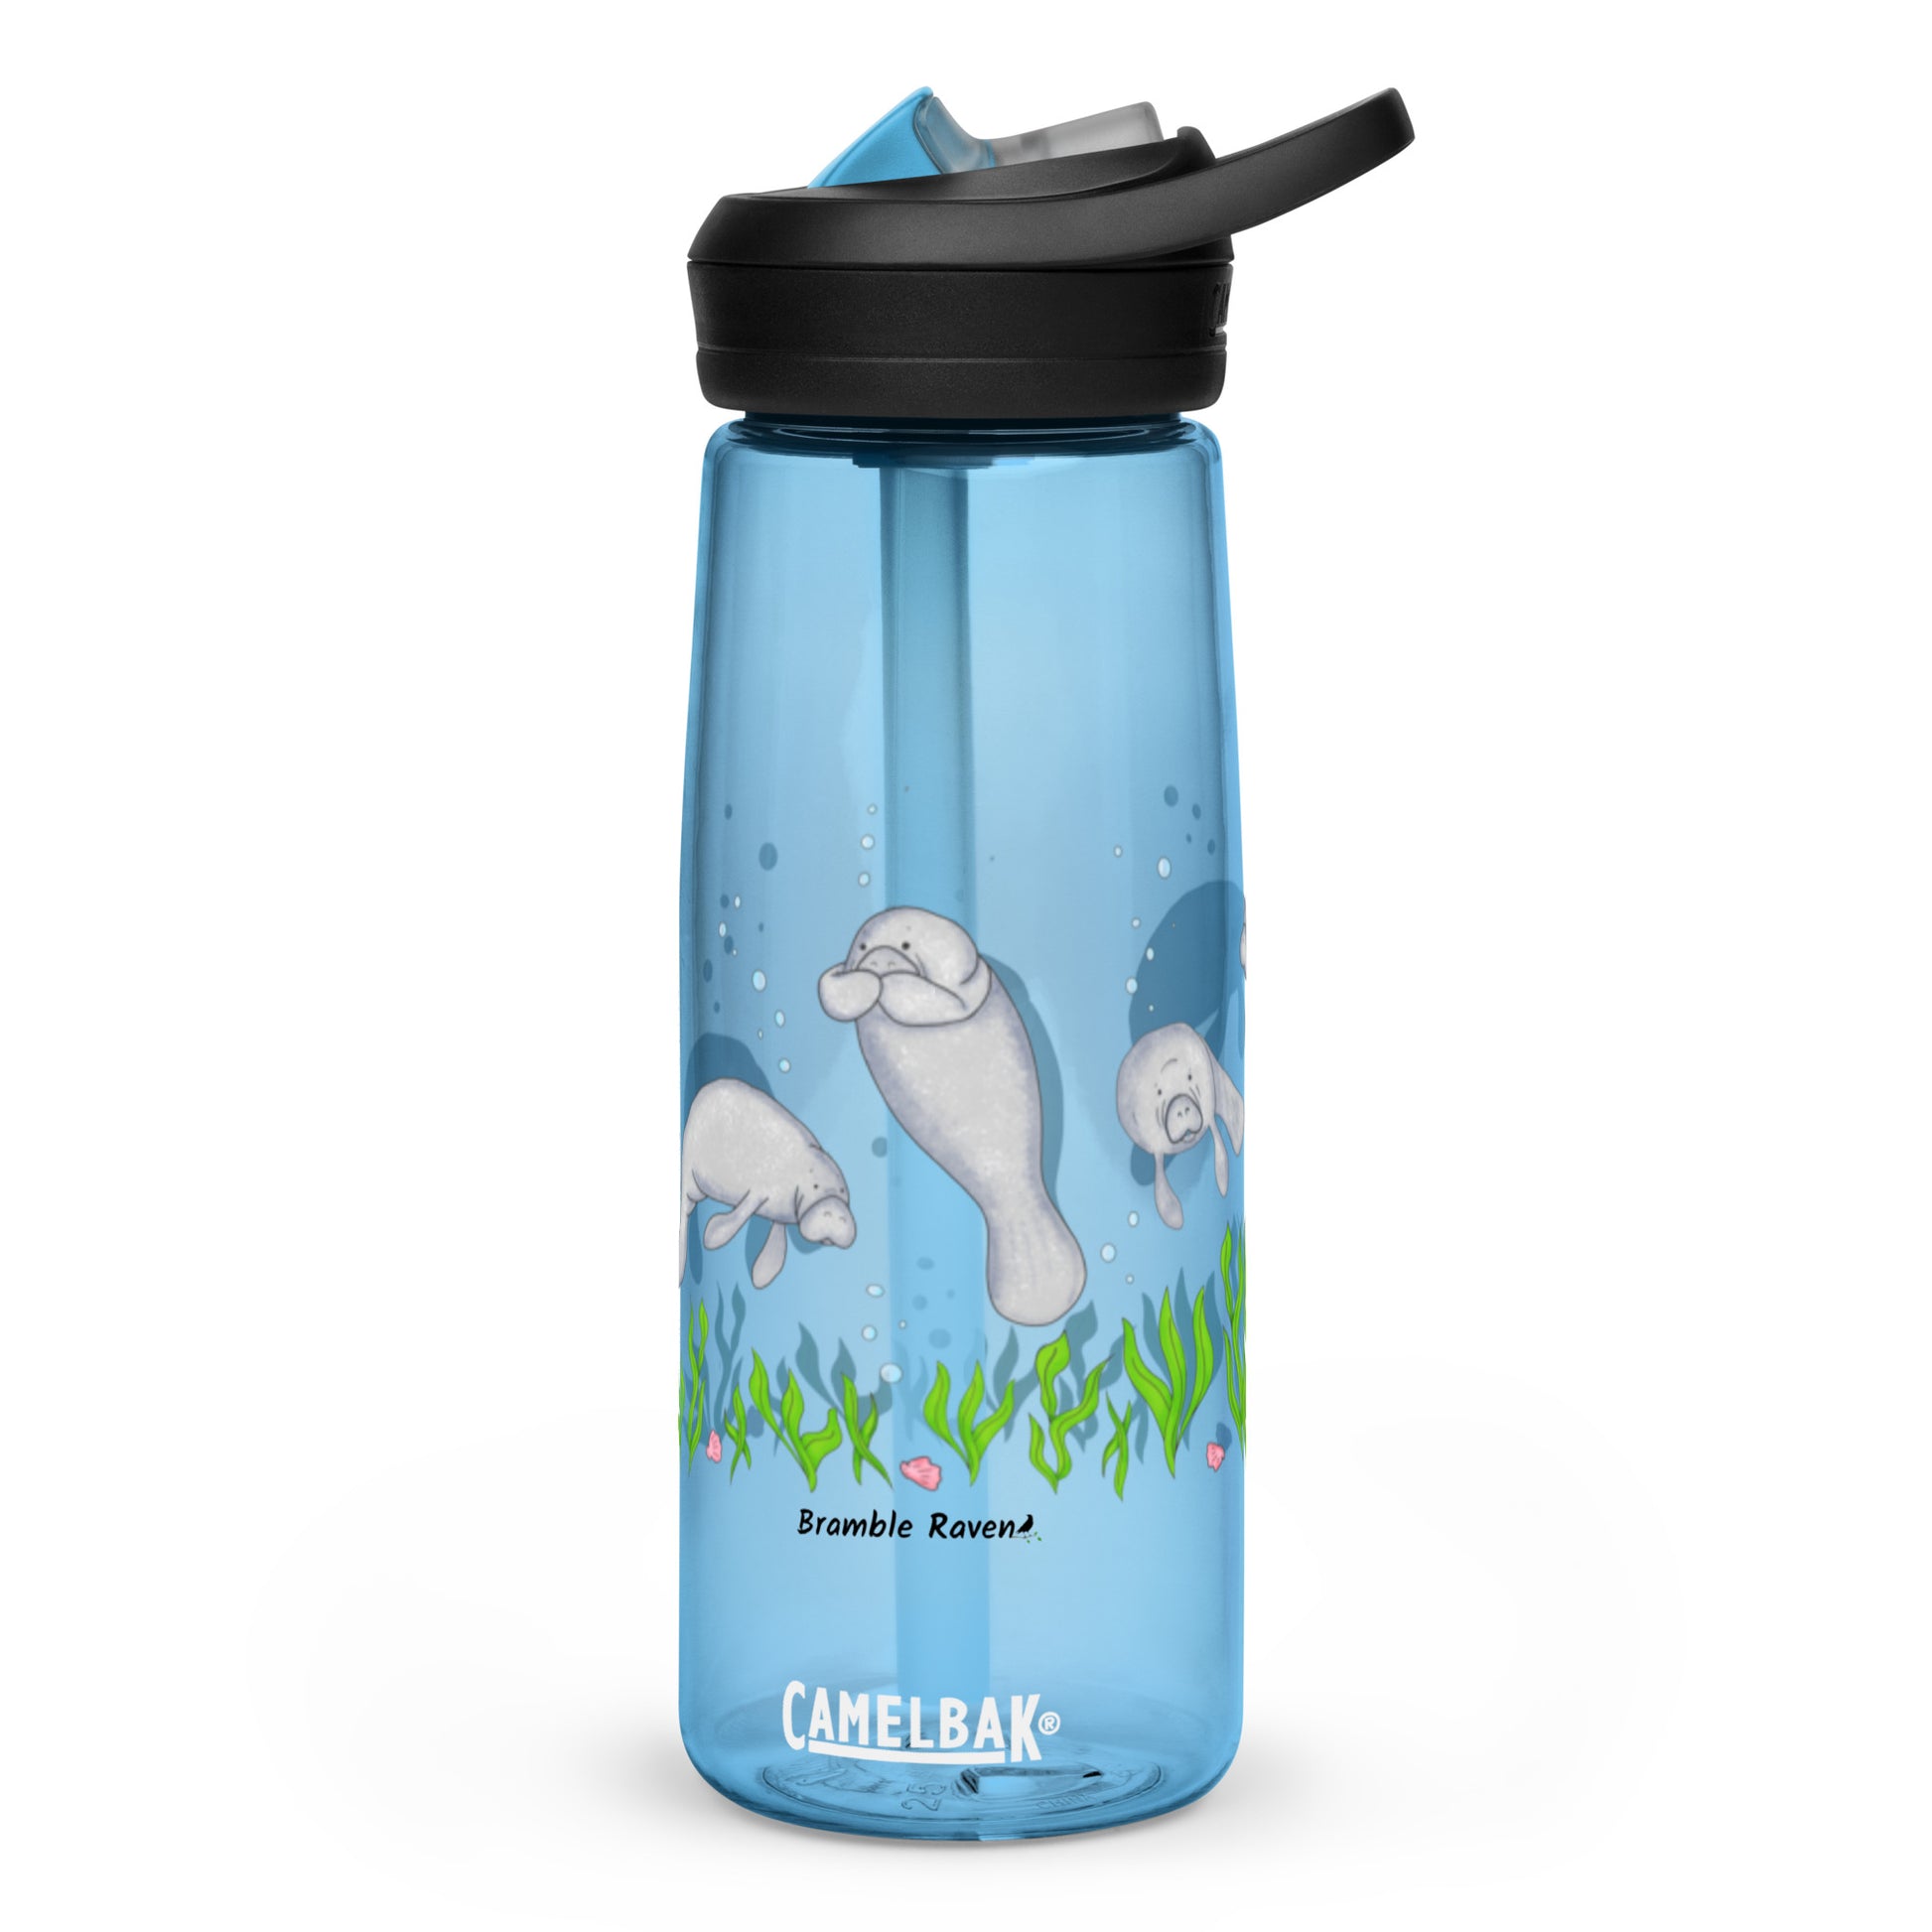 25 ounce sports water bottle with spill proof lid and bite valve. Light blue stain and odor-resistant BPA-free plastic with manatee designs around the bottle, swimming above the seaweed and shells.